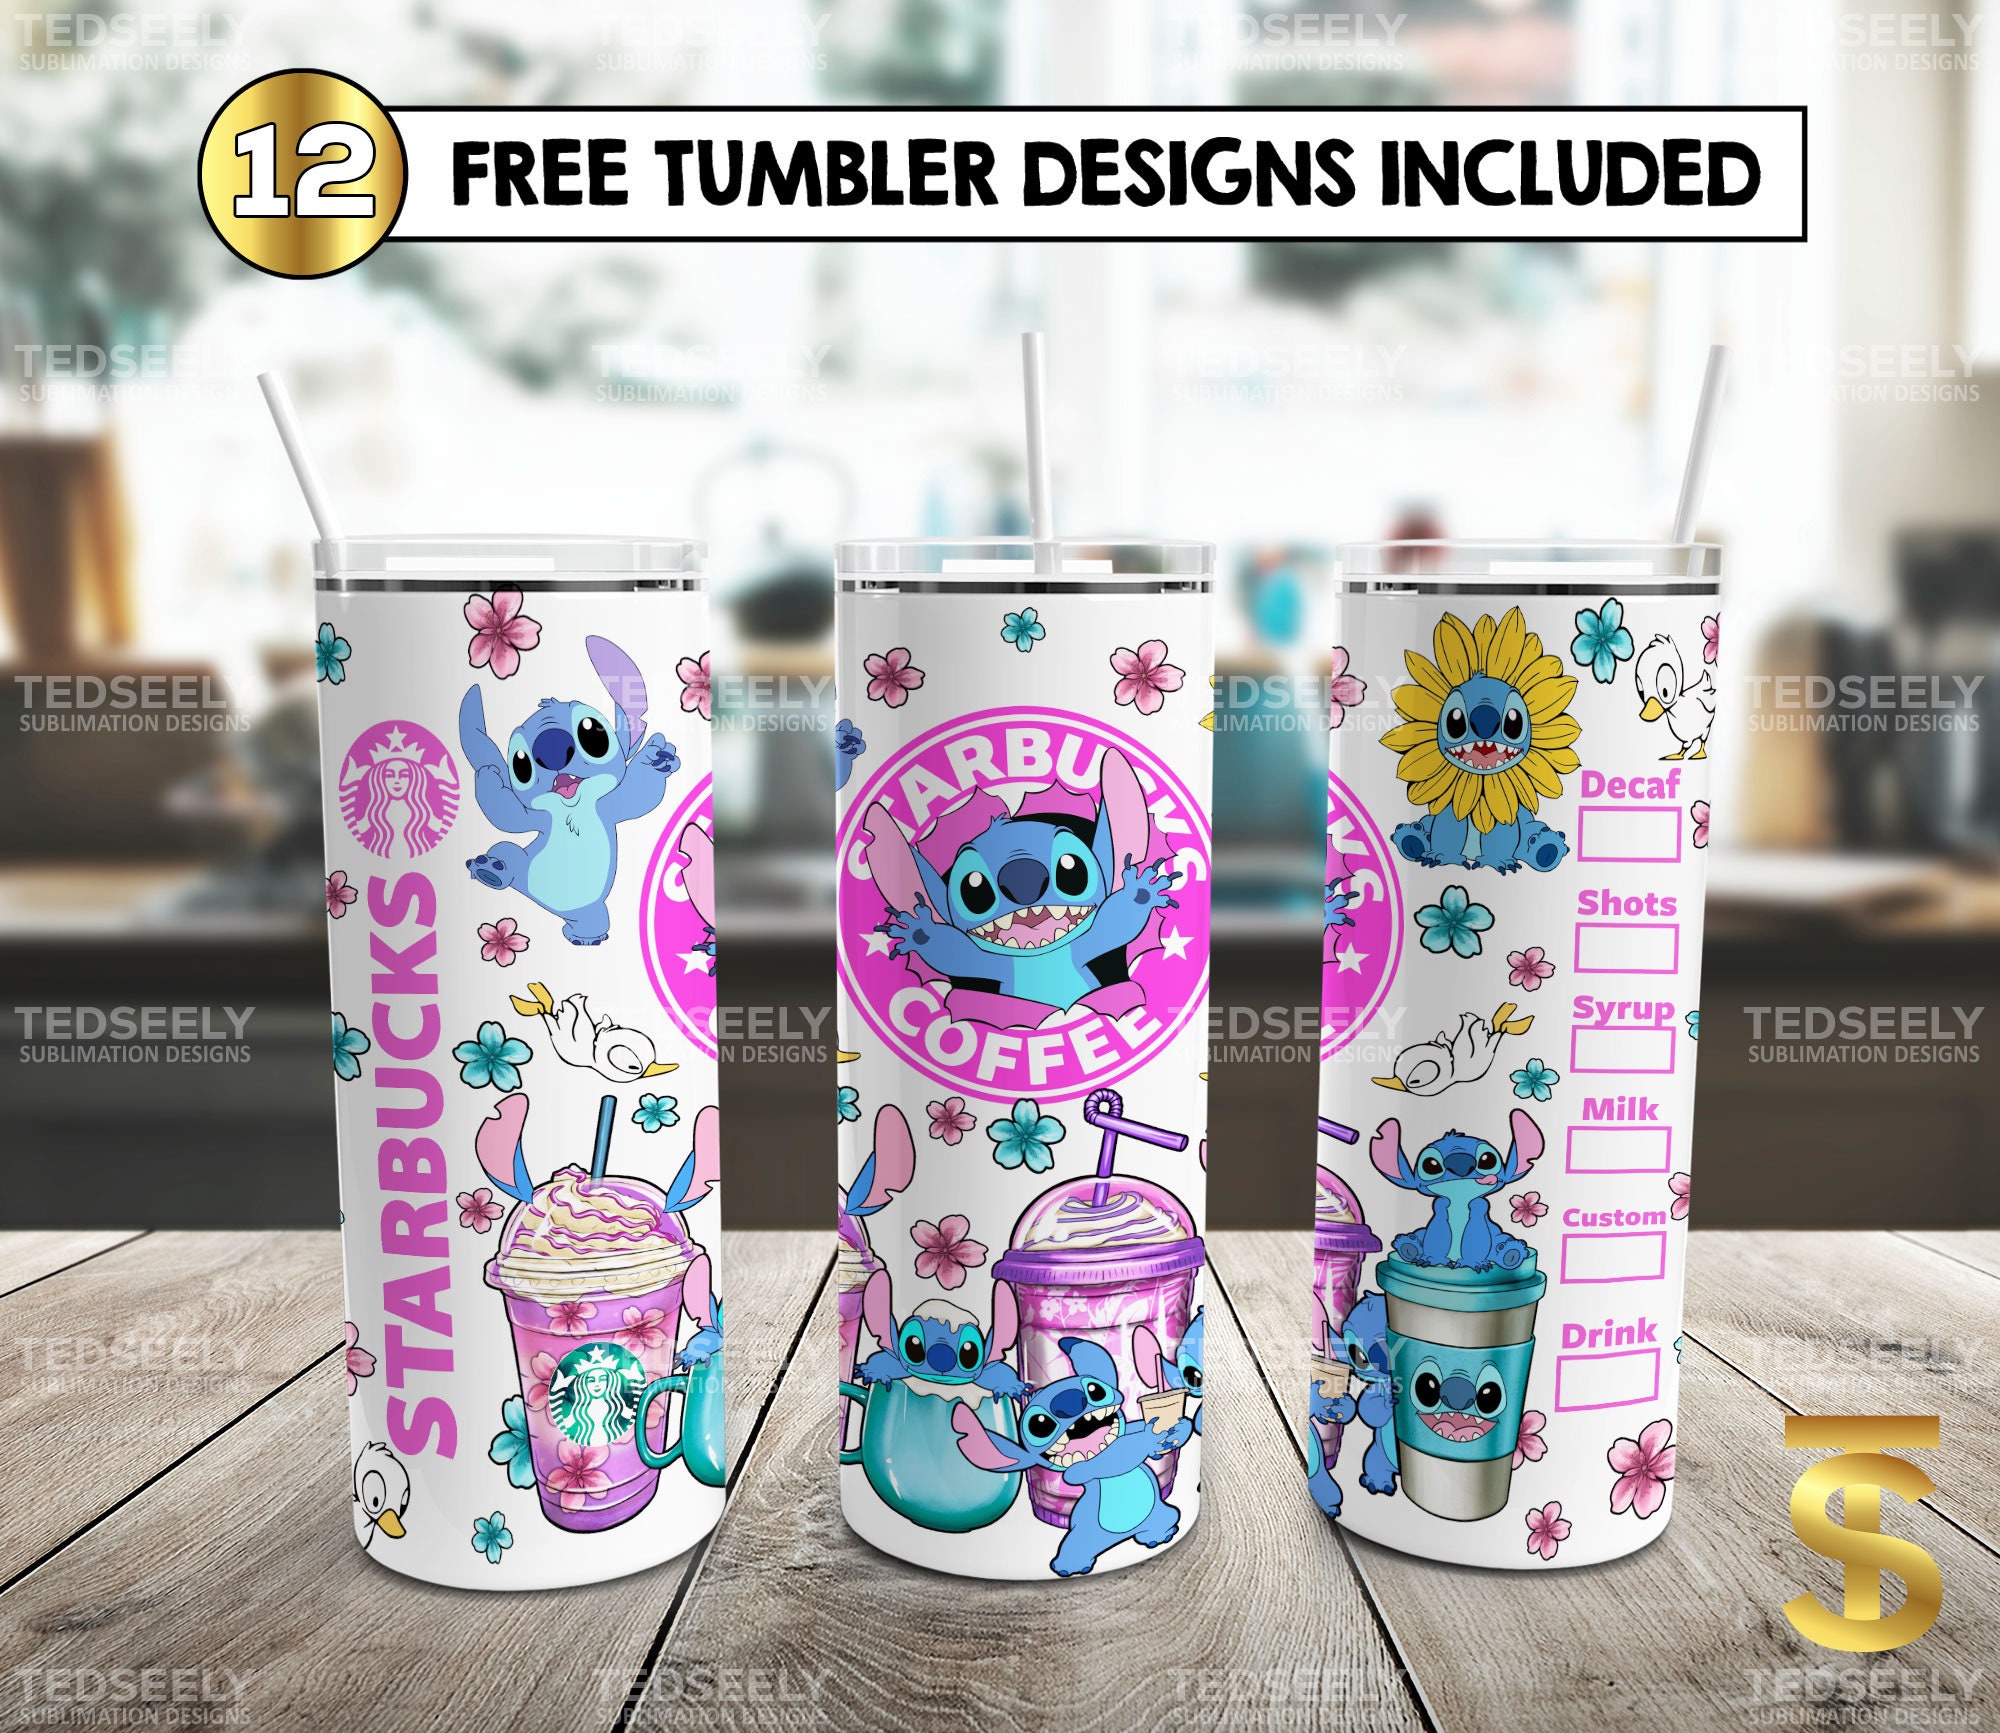 Stitch Starbucks Tumbler is available now! 💙 #stitch #disney #liloand